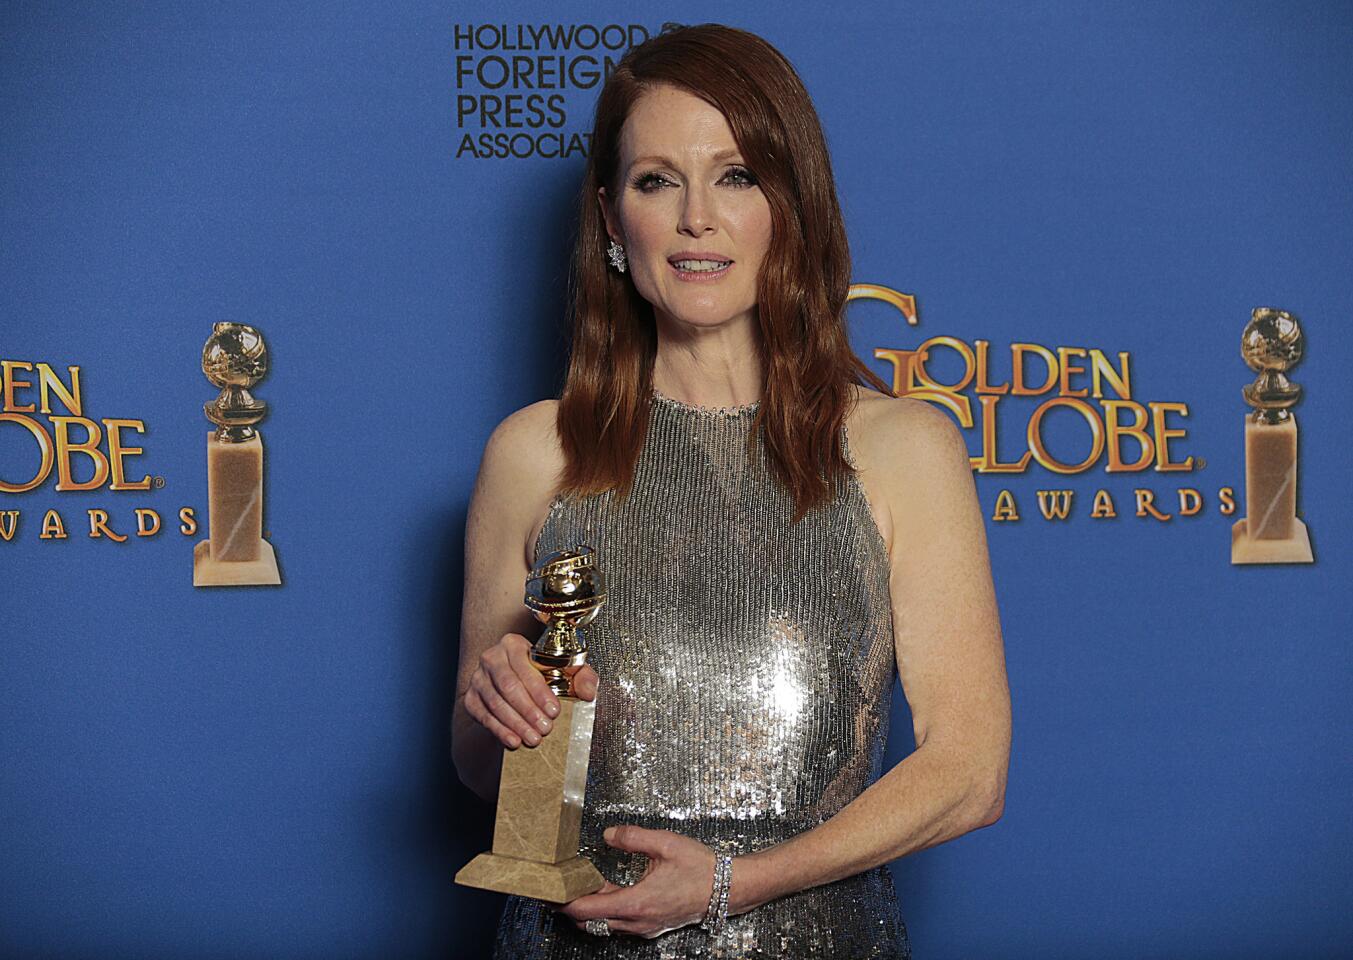 Julianne Moore displays her award for lead actress in a film drama for "Still Alice" backstage at the 72nd Golden Globe Awards.